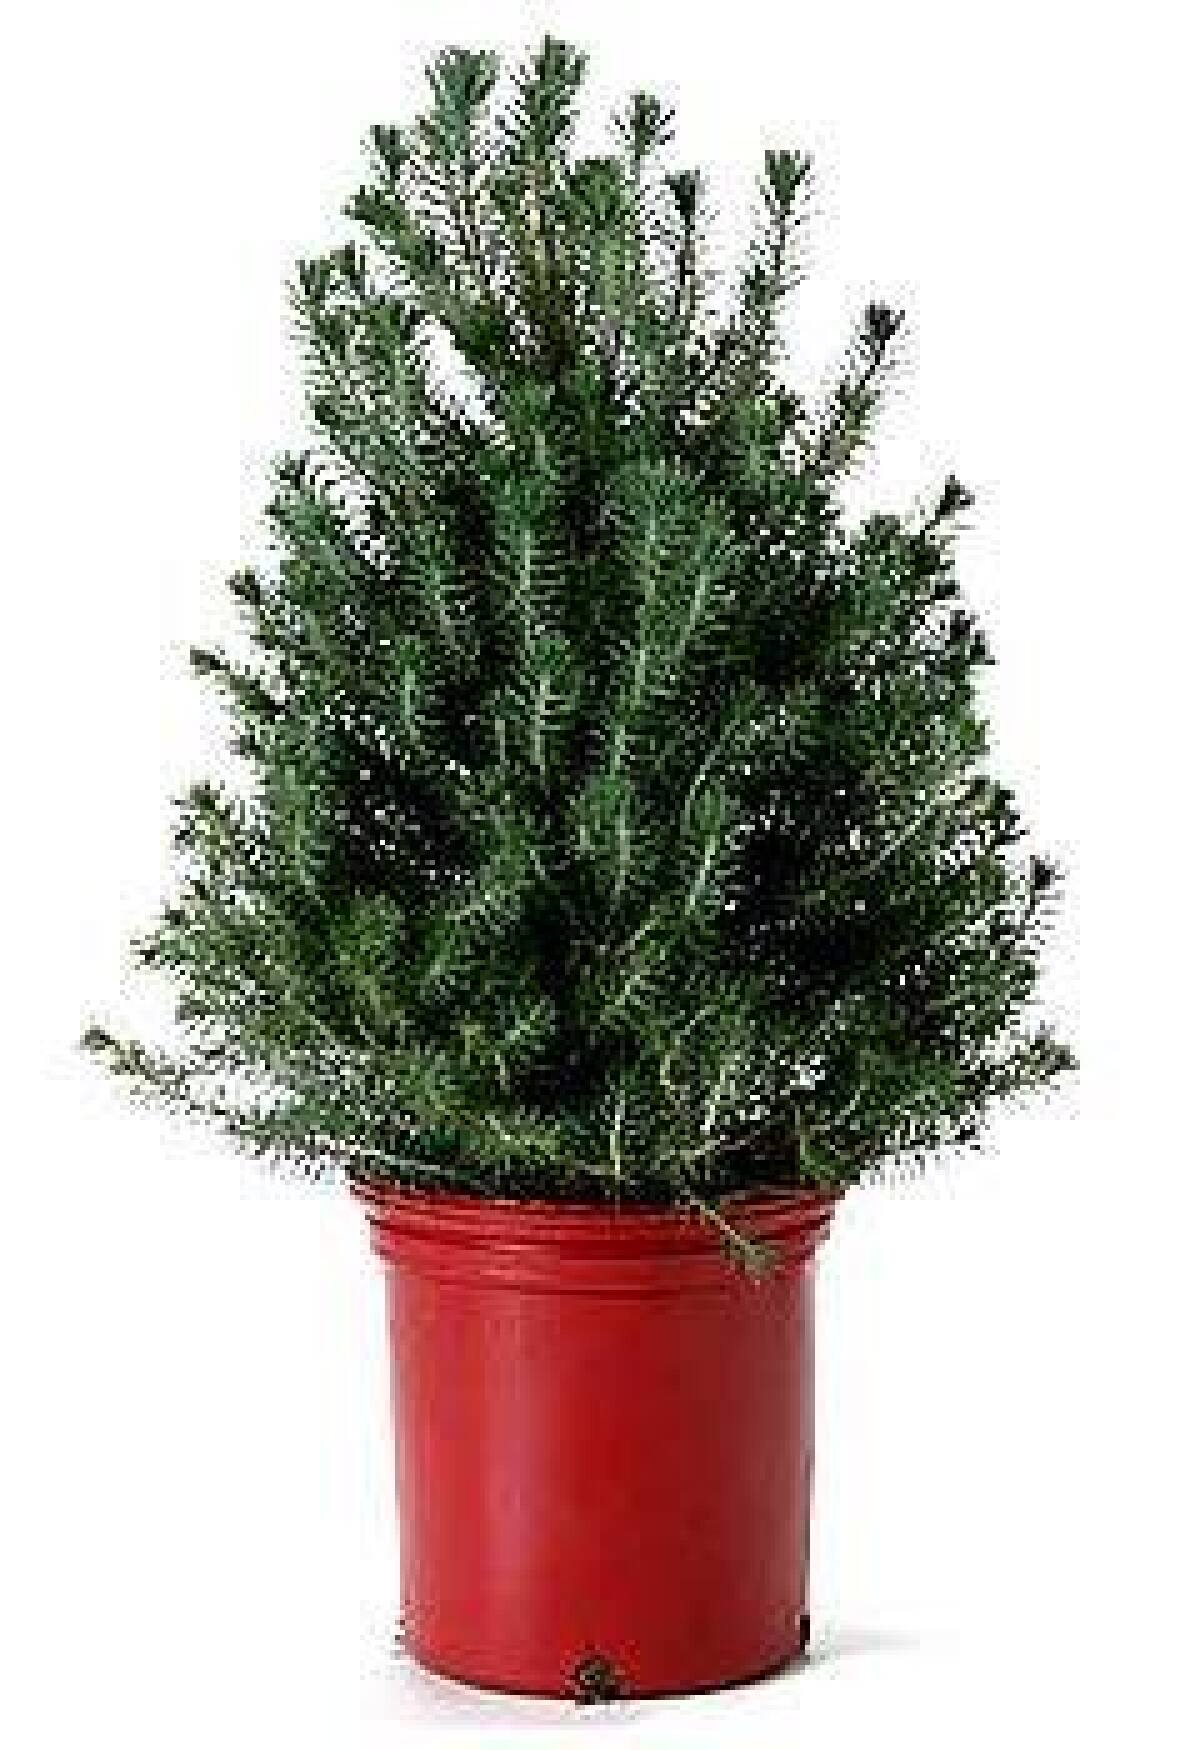 The Italian stone pine can quickly reach 40 to 80 feet.